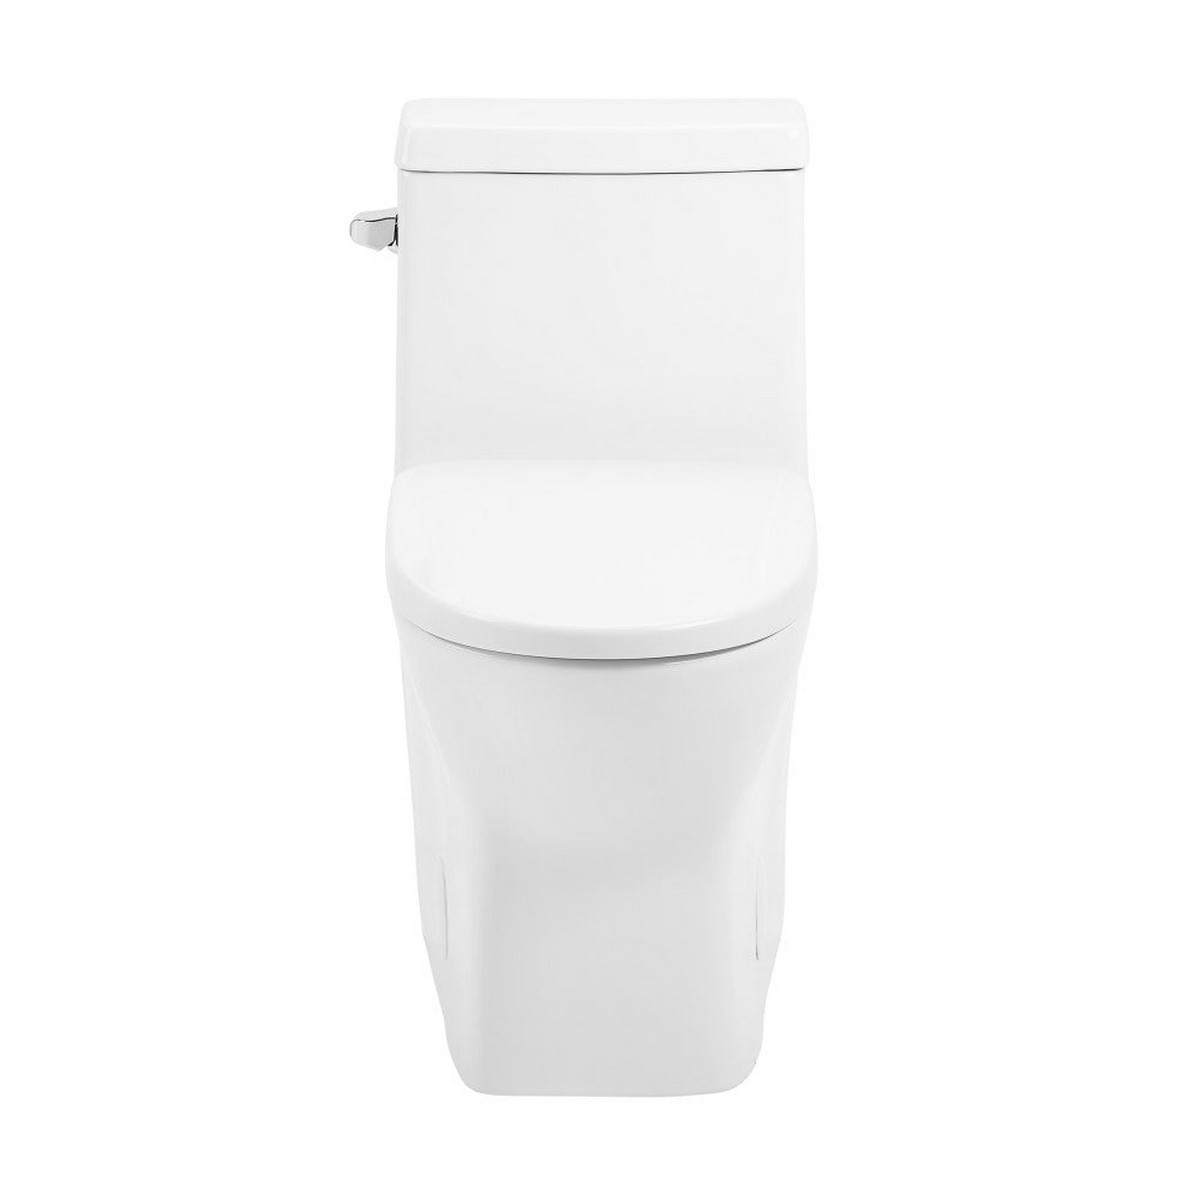 SWISS MADISON SM-1T267 SUBLIME 1.28 GPF LEFT SIDE FLUSH ONE-PIECE ELONGATED TOILET IN GLOSSY WHITE